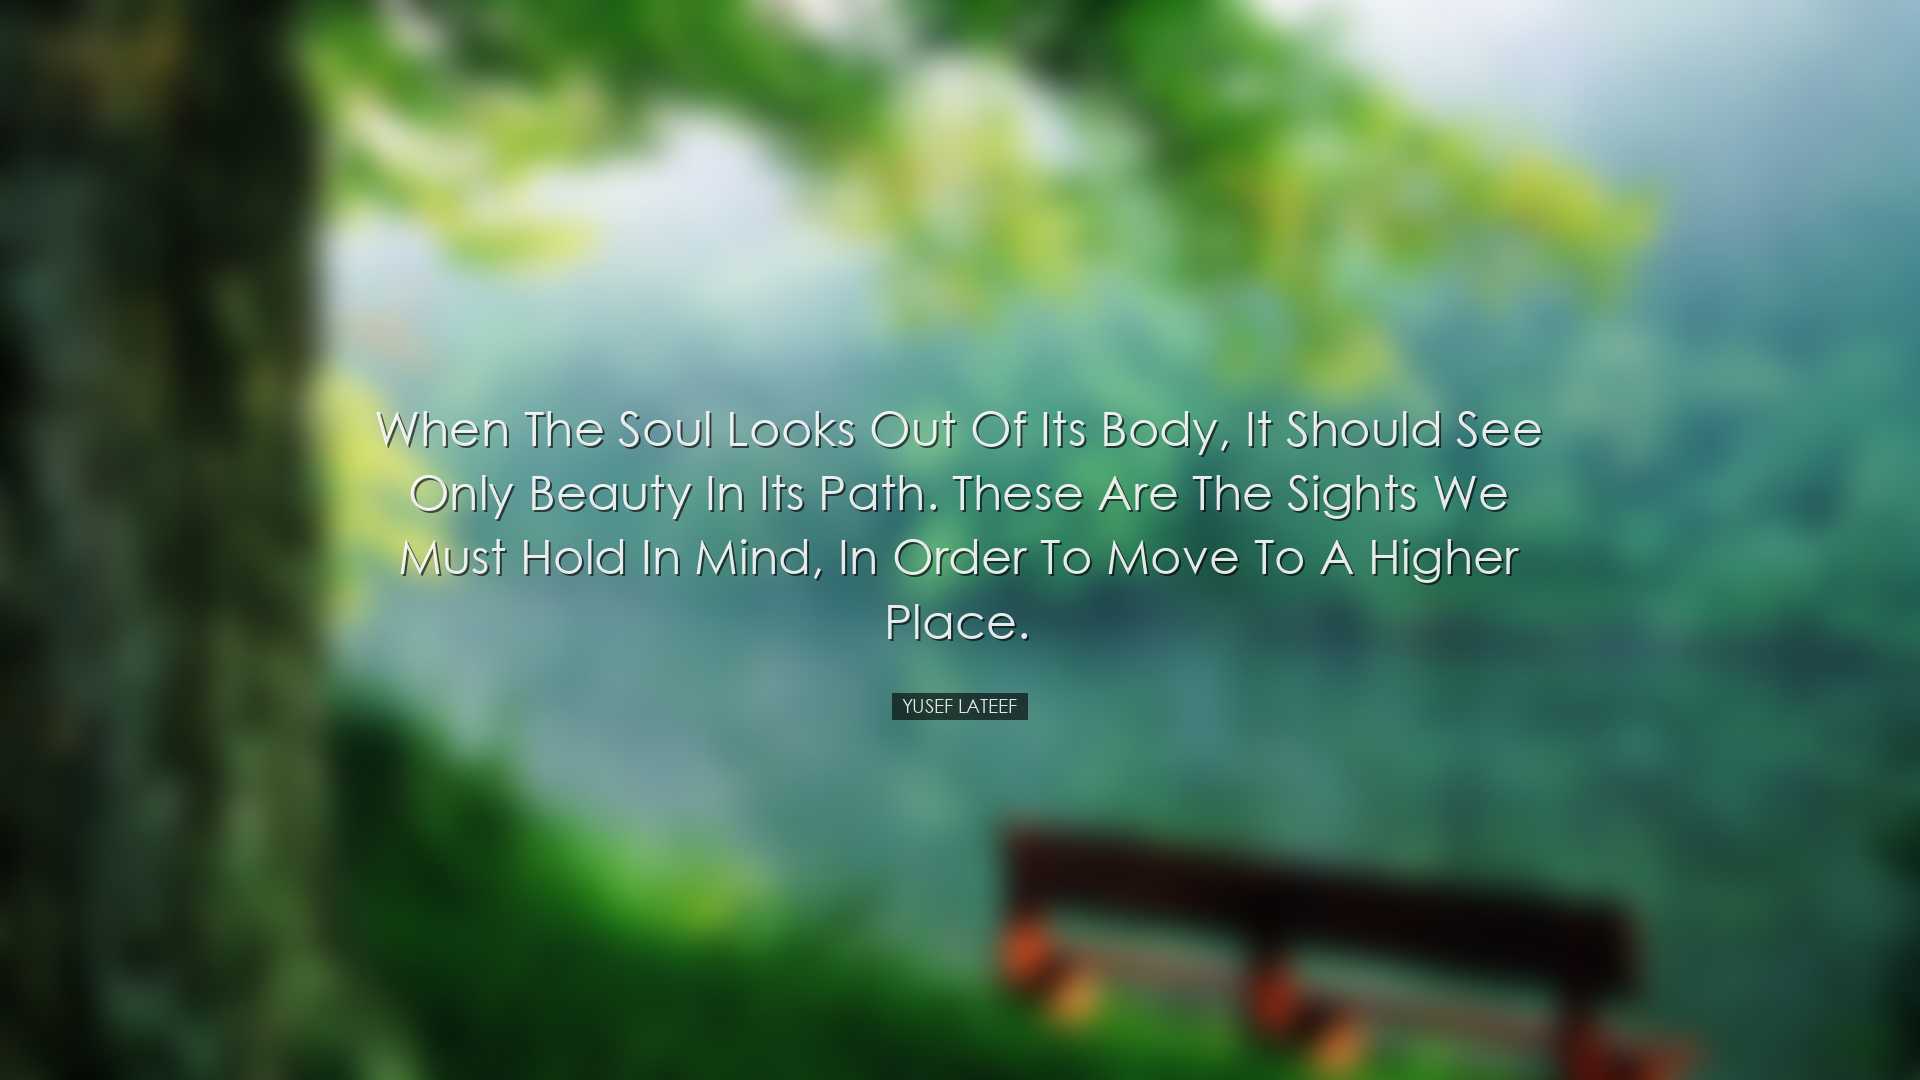 When the soul looks out of its body, it should see only beauty in